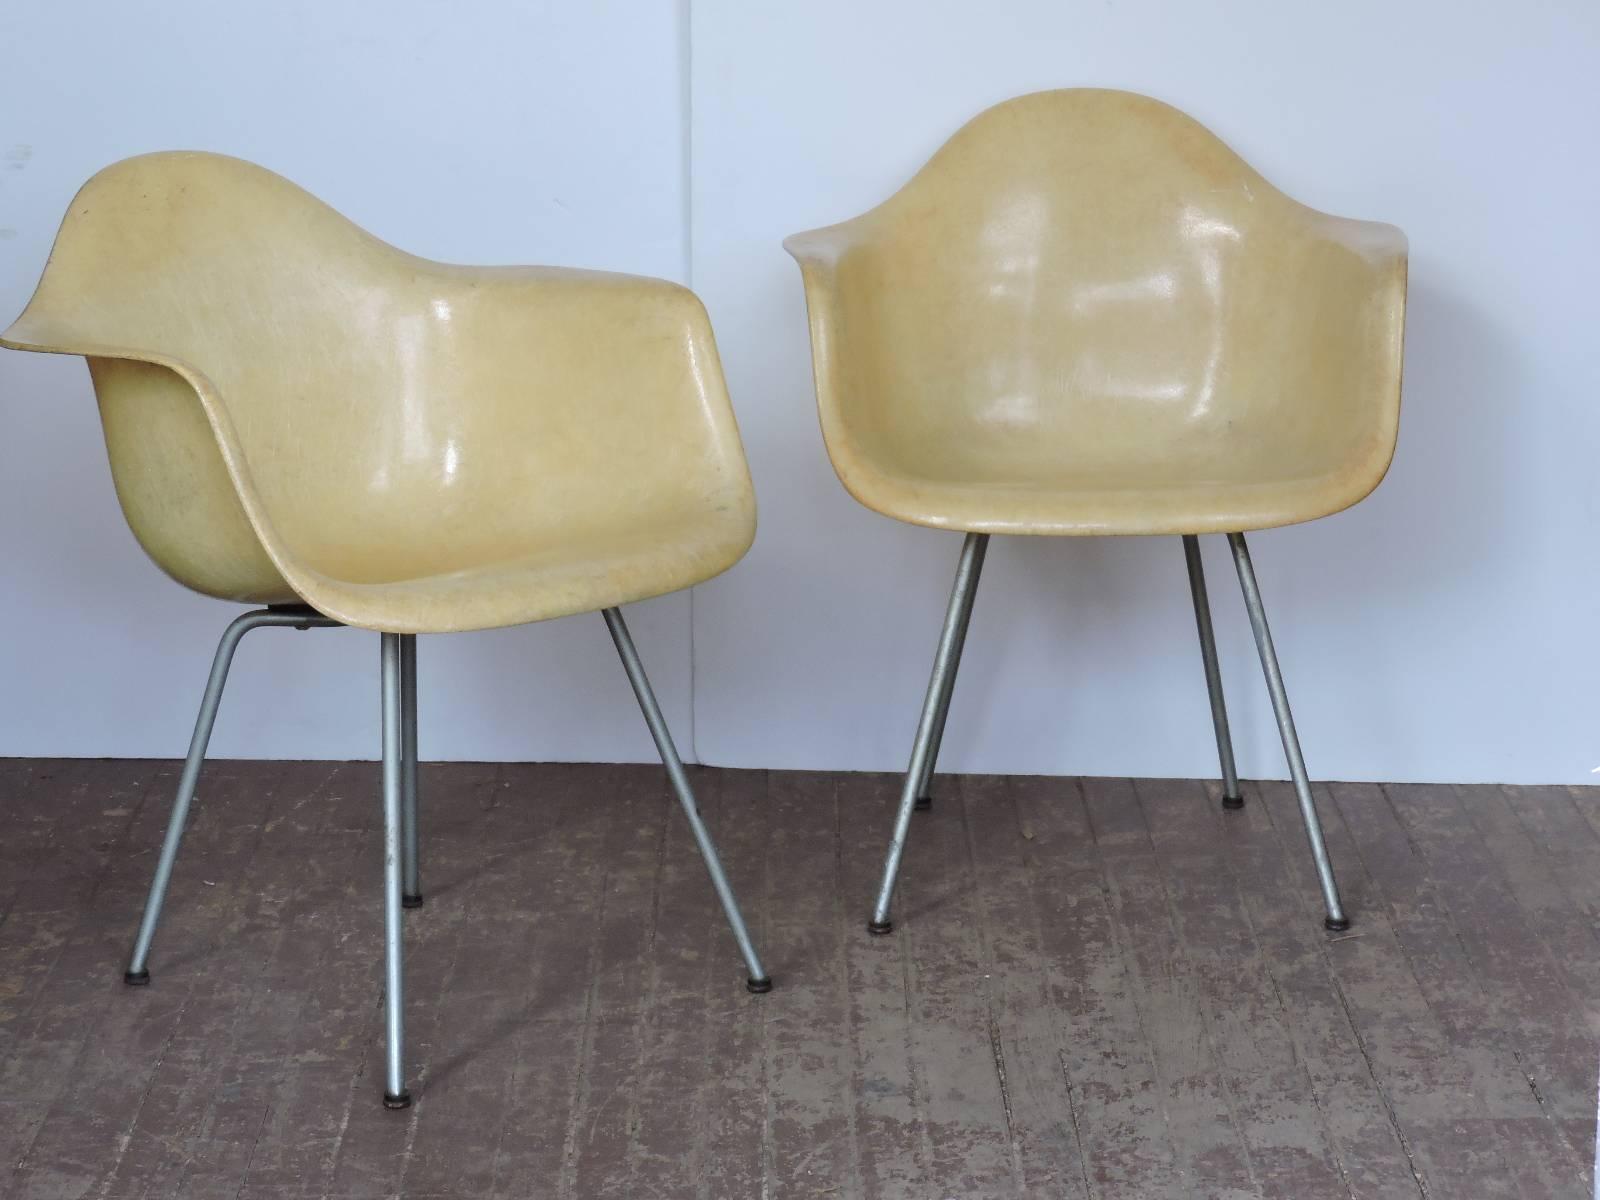 Pair of all original first generation Charles and Ray Eames parchment very pale lemon yellow fiberglass rope edge armchairs with X-base and large shock mounts, zinc legs and domes of silence glides. Zenith plastics for Herman Miller checkerboard